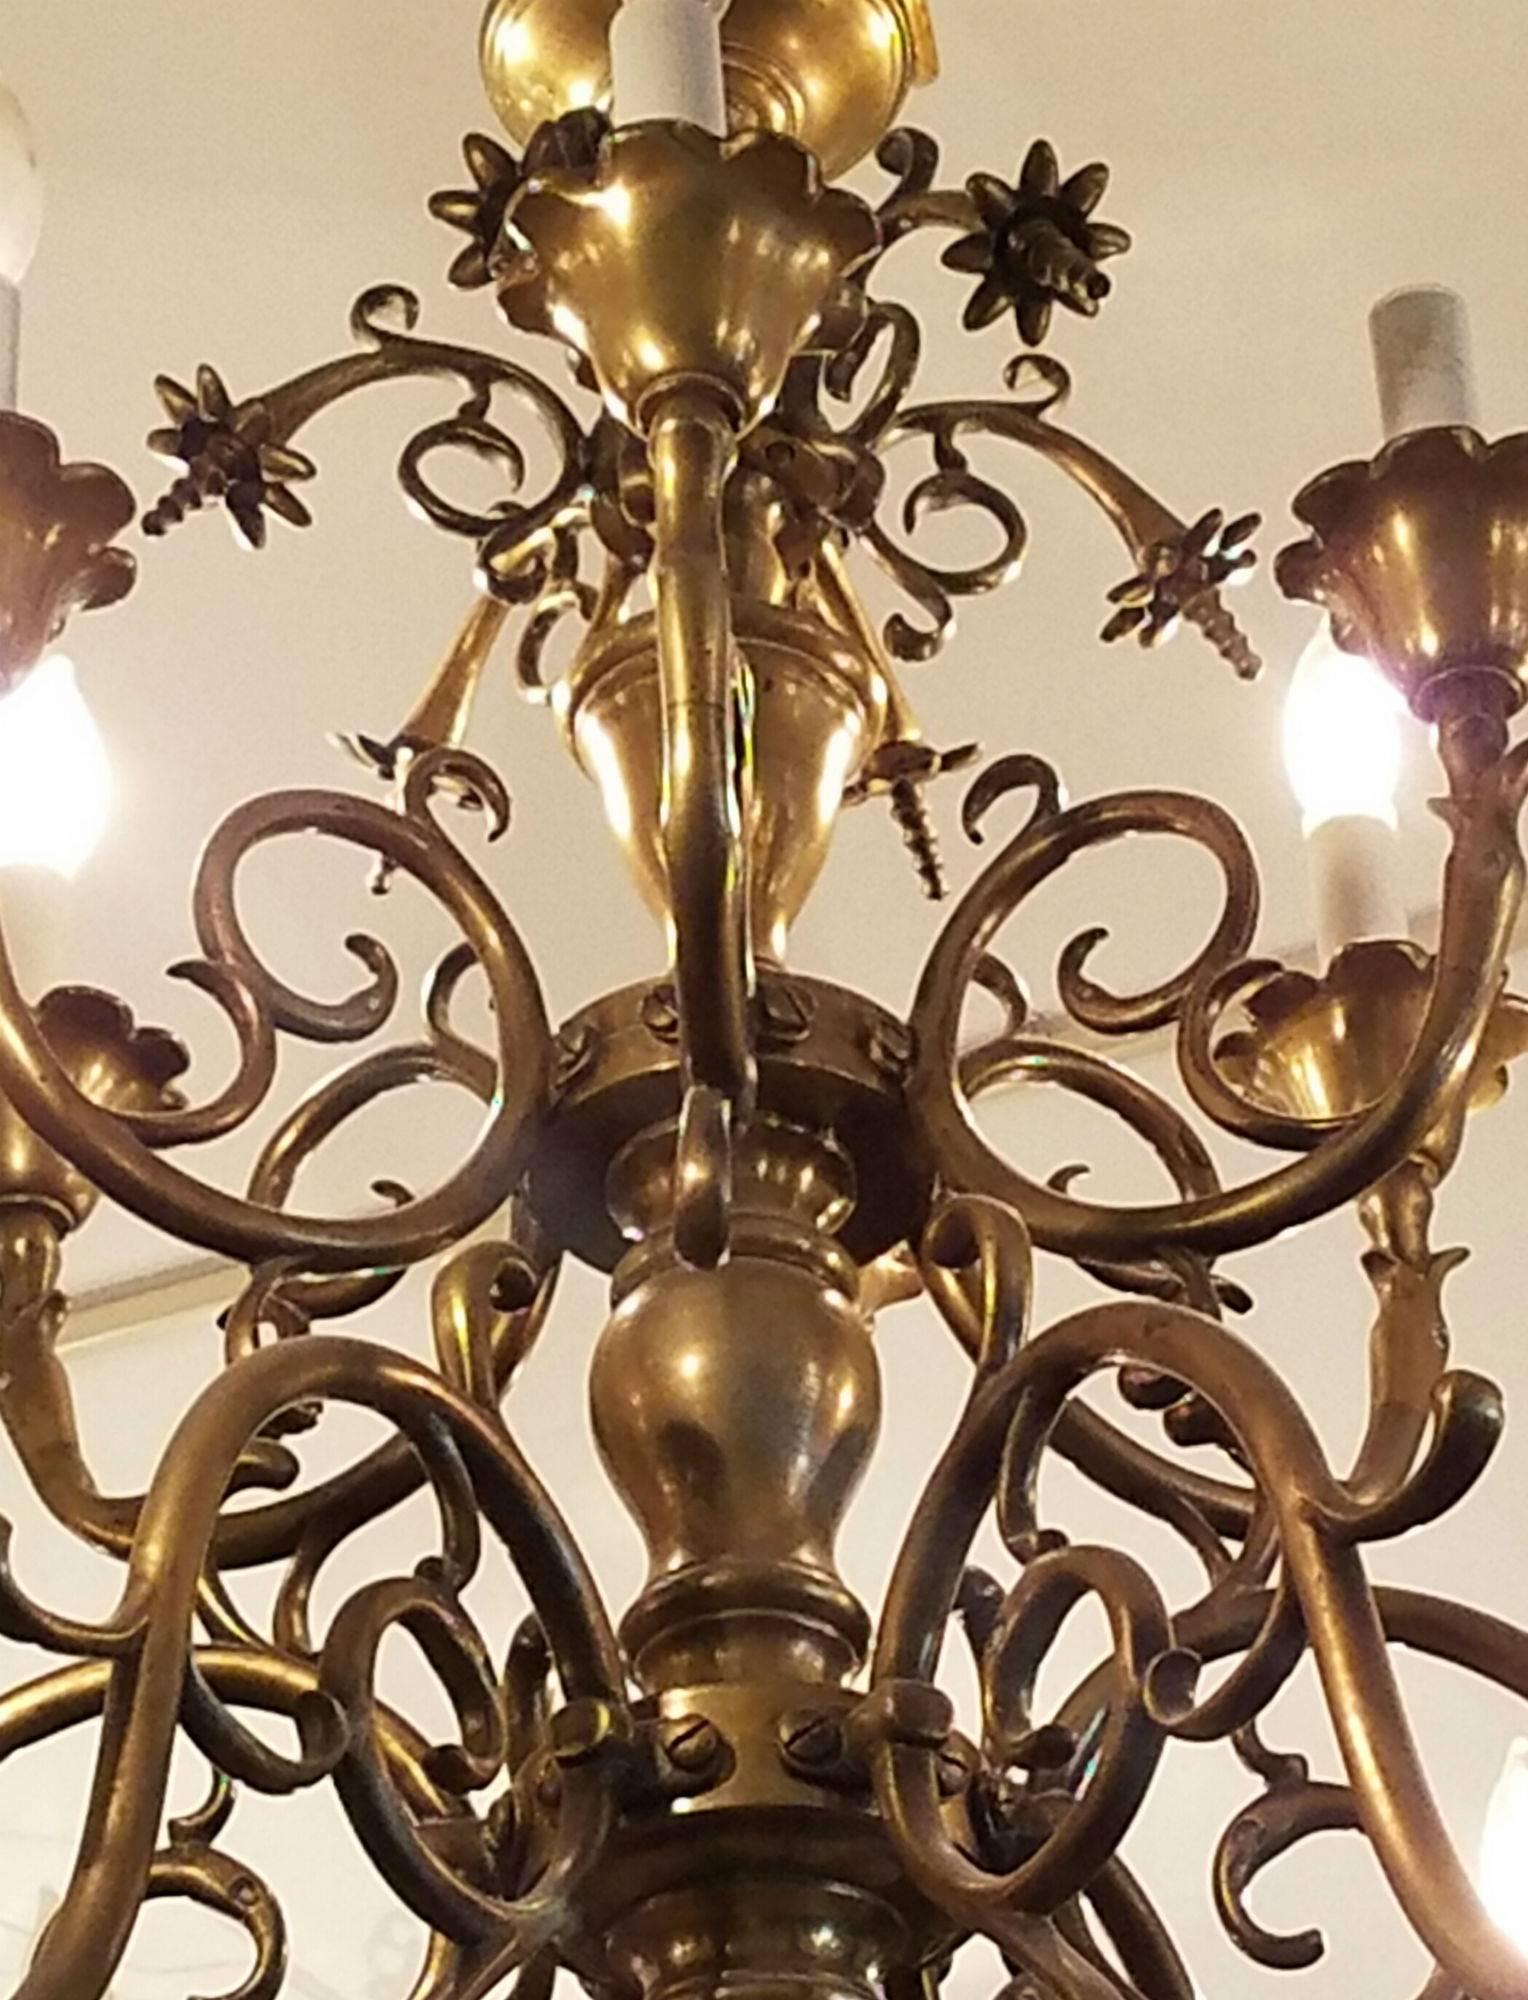 Large Dutch brass two-tier twelve-light chandelier with 's' curved arms, scalloped candle cups and decorative flower heads.